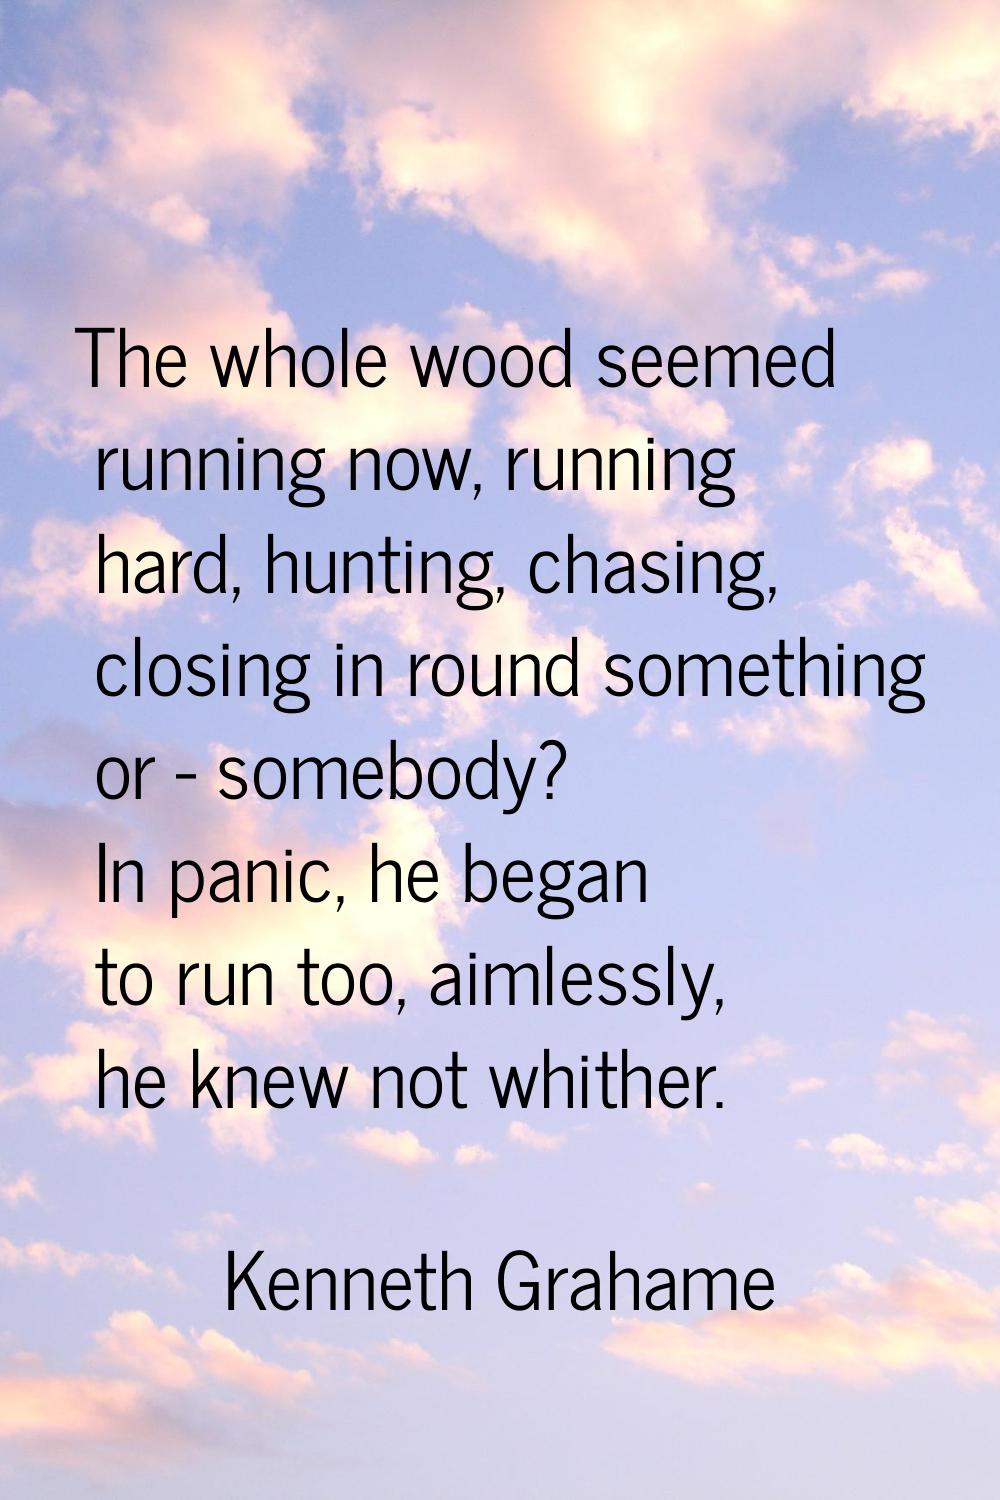 The whole wood seemed running now, running hard, hunting, chasing, closing in round something or - 